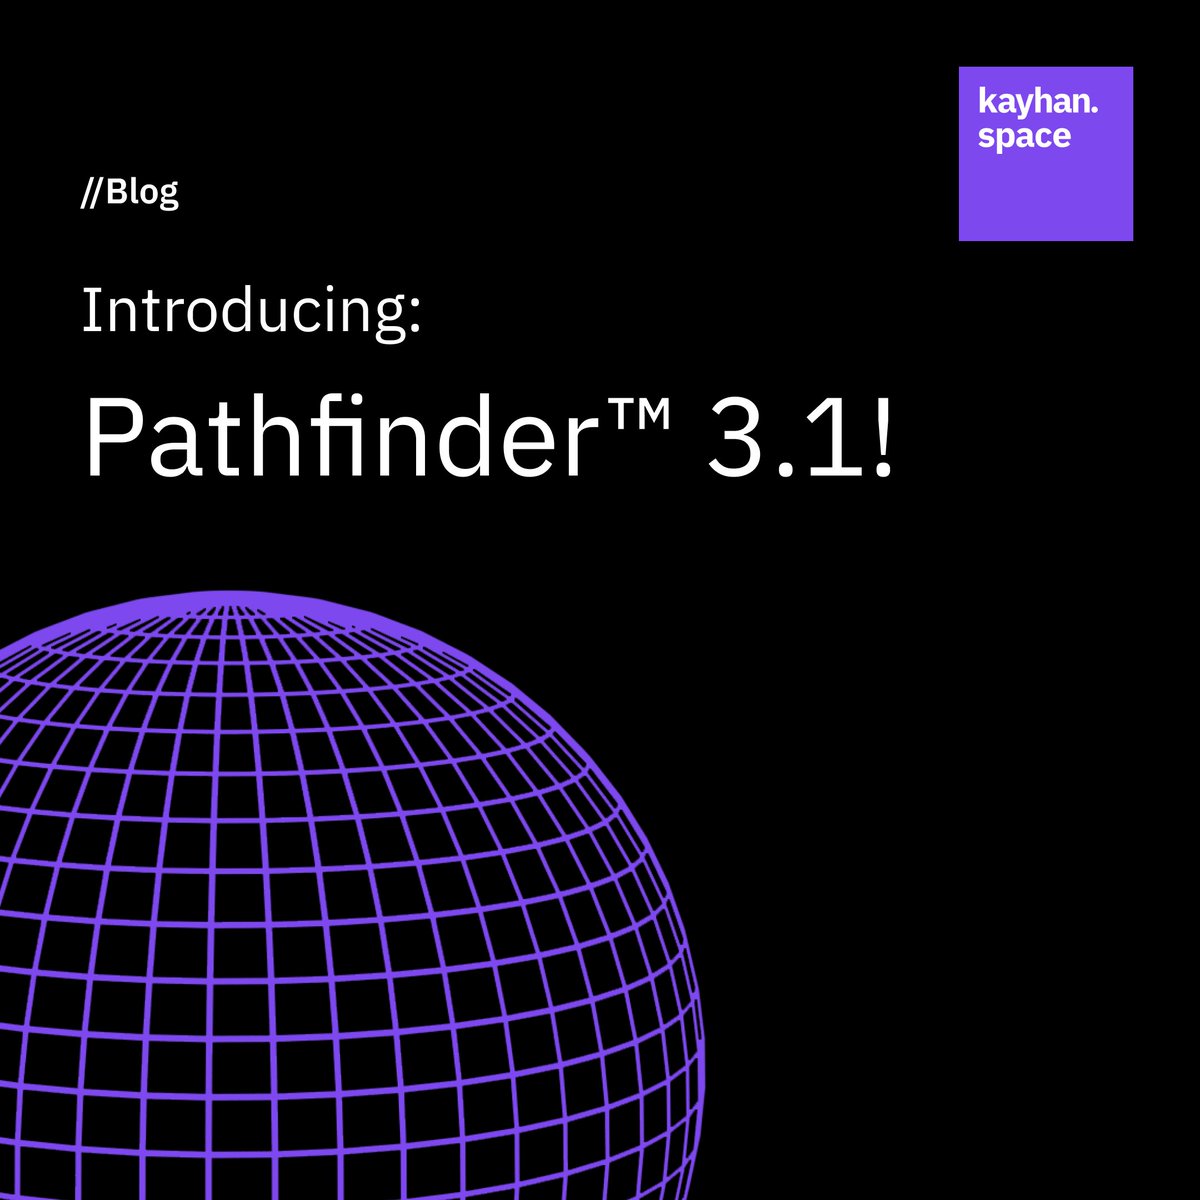 Introducing: Pathfinder™ 3.1! The latest upgrade to our autonomous space traffic coordination platform enhances & simplifies key areas of #satelliteoperations, offering teams better visibility of their constellations through more flexible and streamlined workflows Read more: